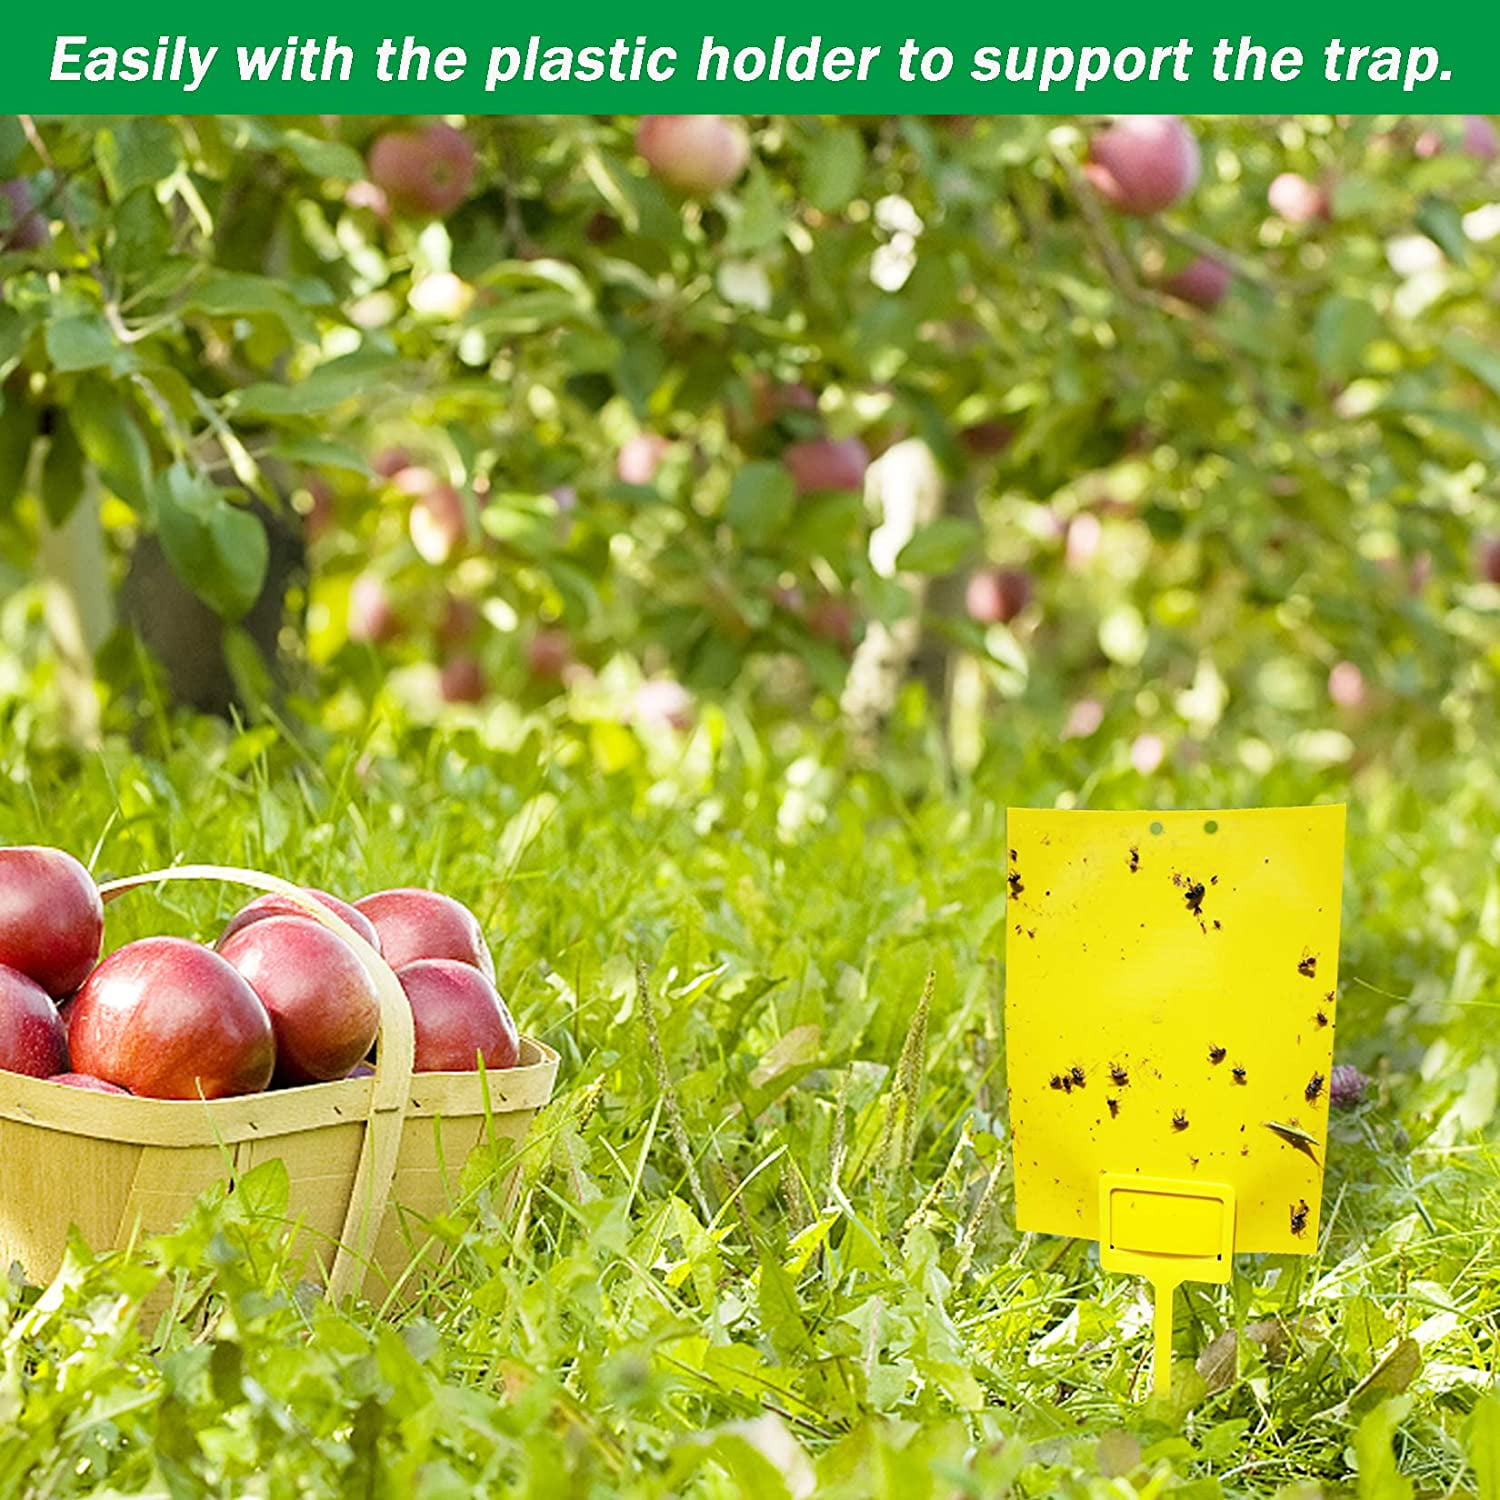 for Capture Insects Like Flies 8x6 Inch Gnats with Twist Ties and Plastic Holders 80 Sheets Yellow Sticky Traps Dual-Sided